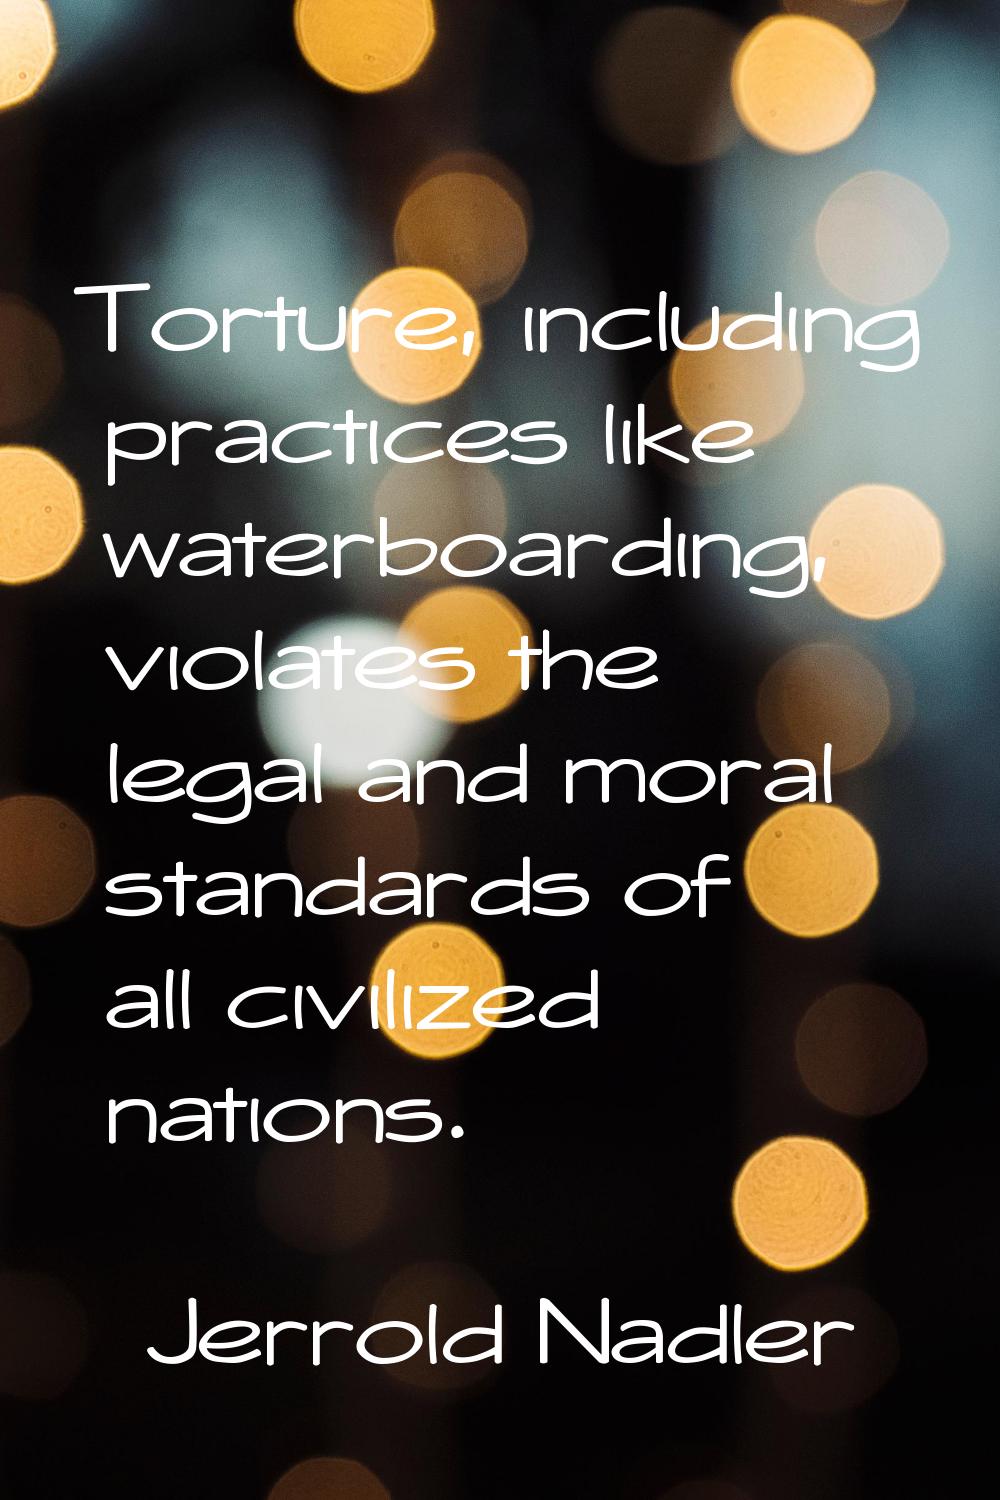 Torture, including practices like waterboarding, violates the legal and moral standards of all civi